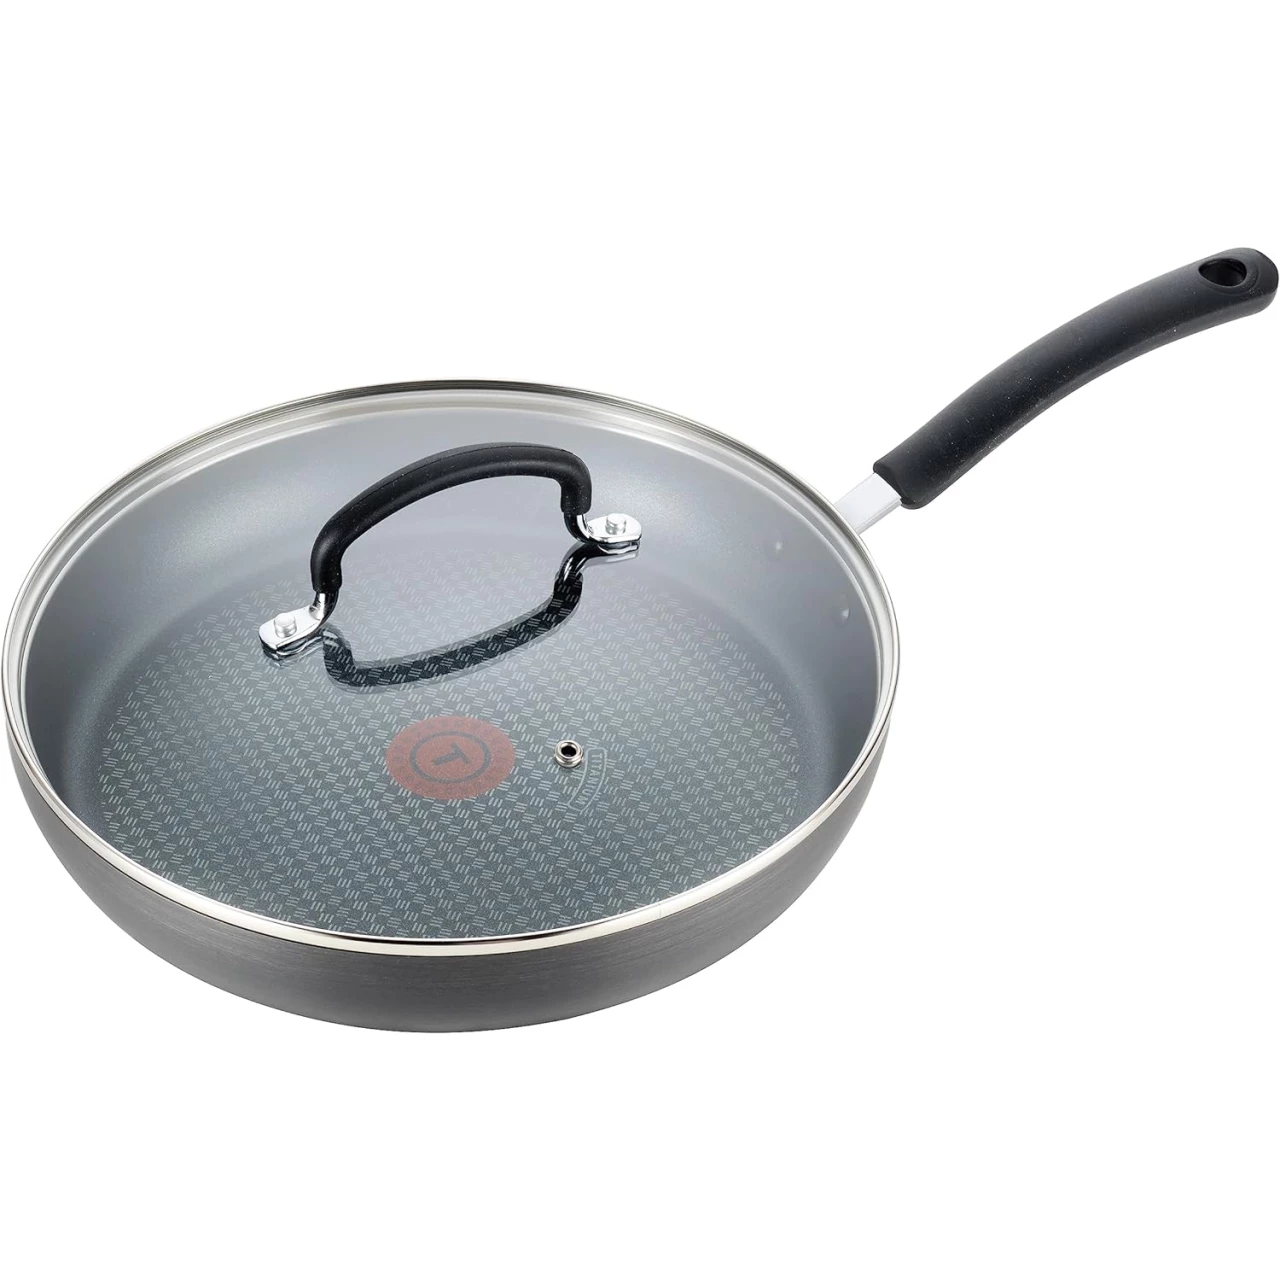 T-fal Ultimate Hard Anodized Nonstick Fry Pan with Lid 12 Inch Cookware, Pots and Pans, Dishwasher Safe Black